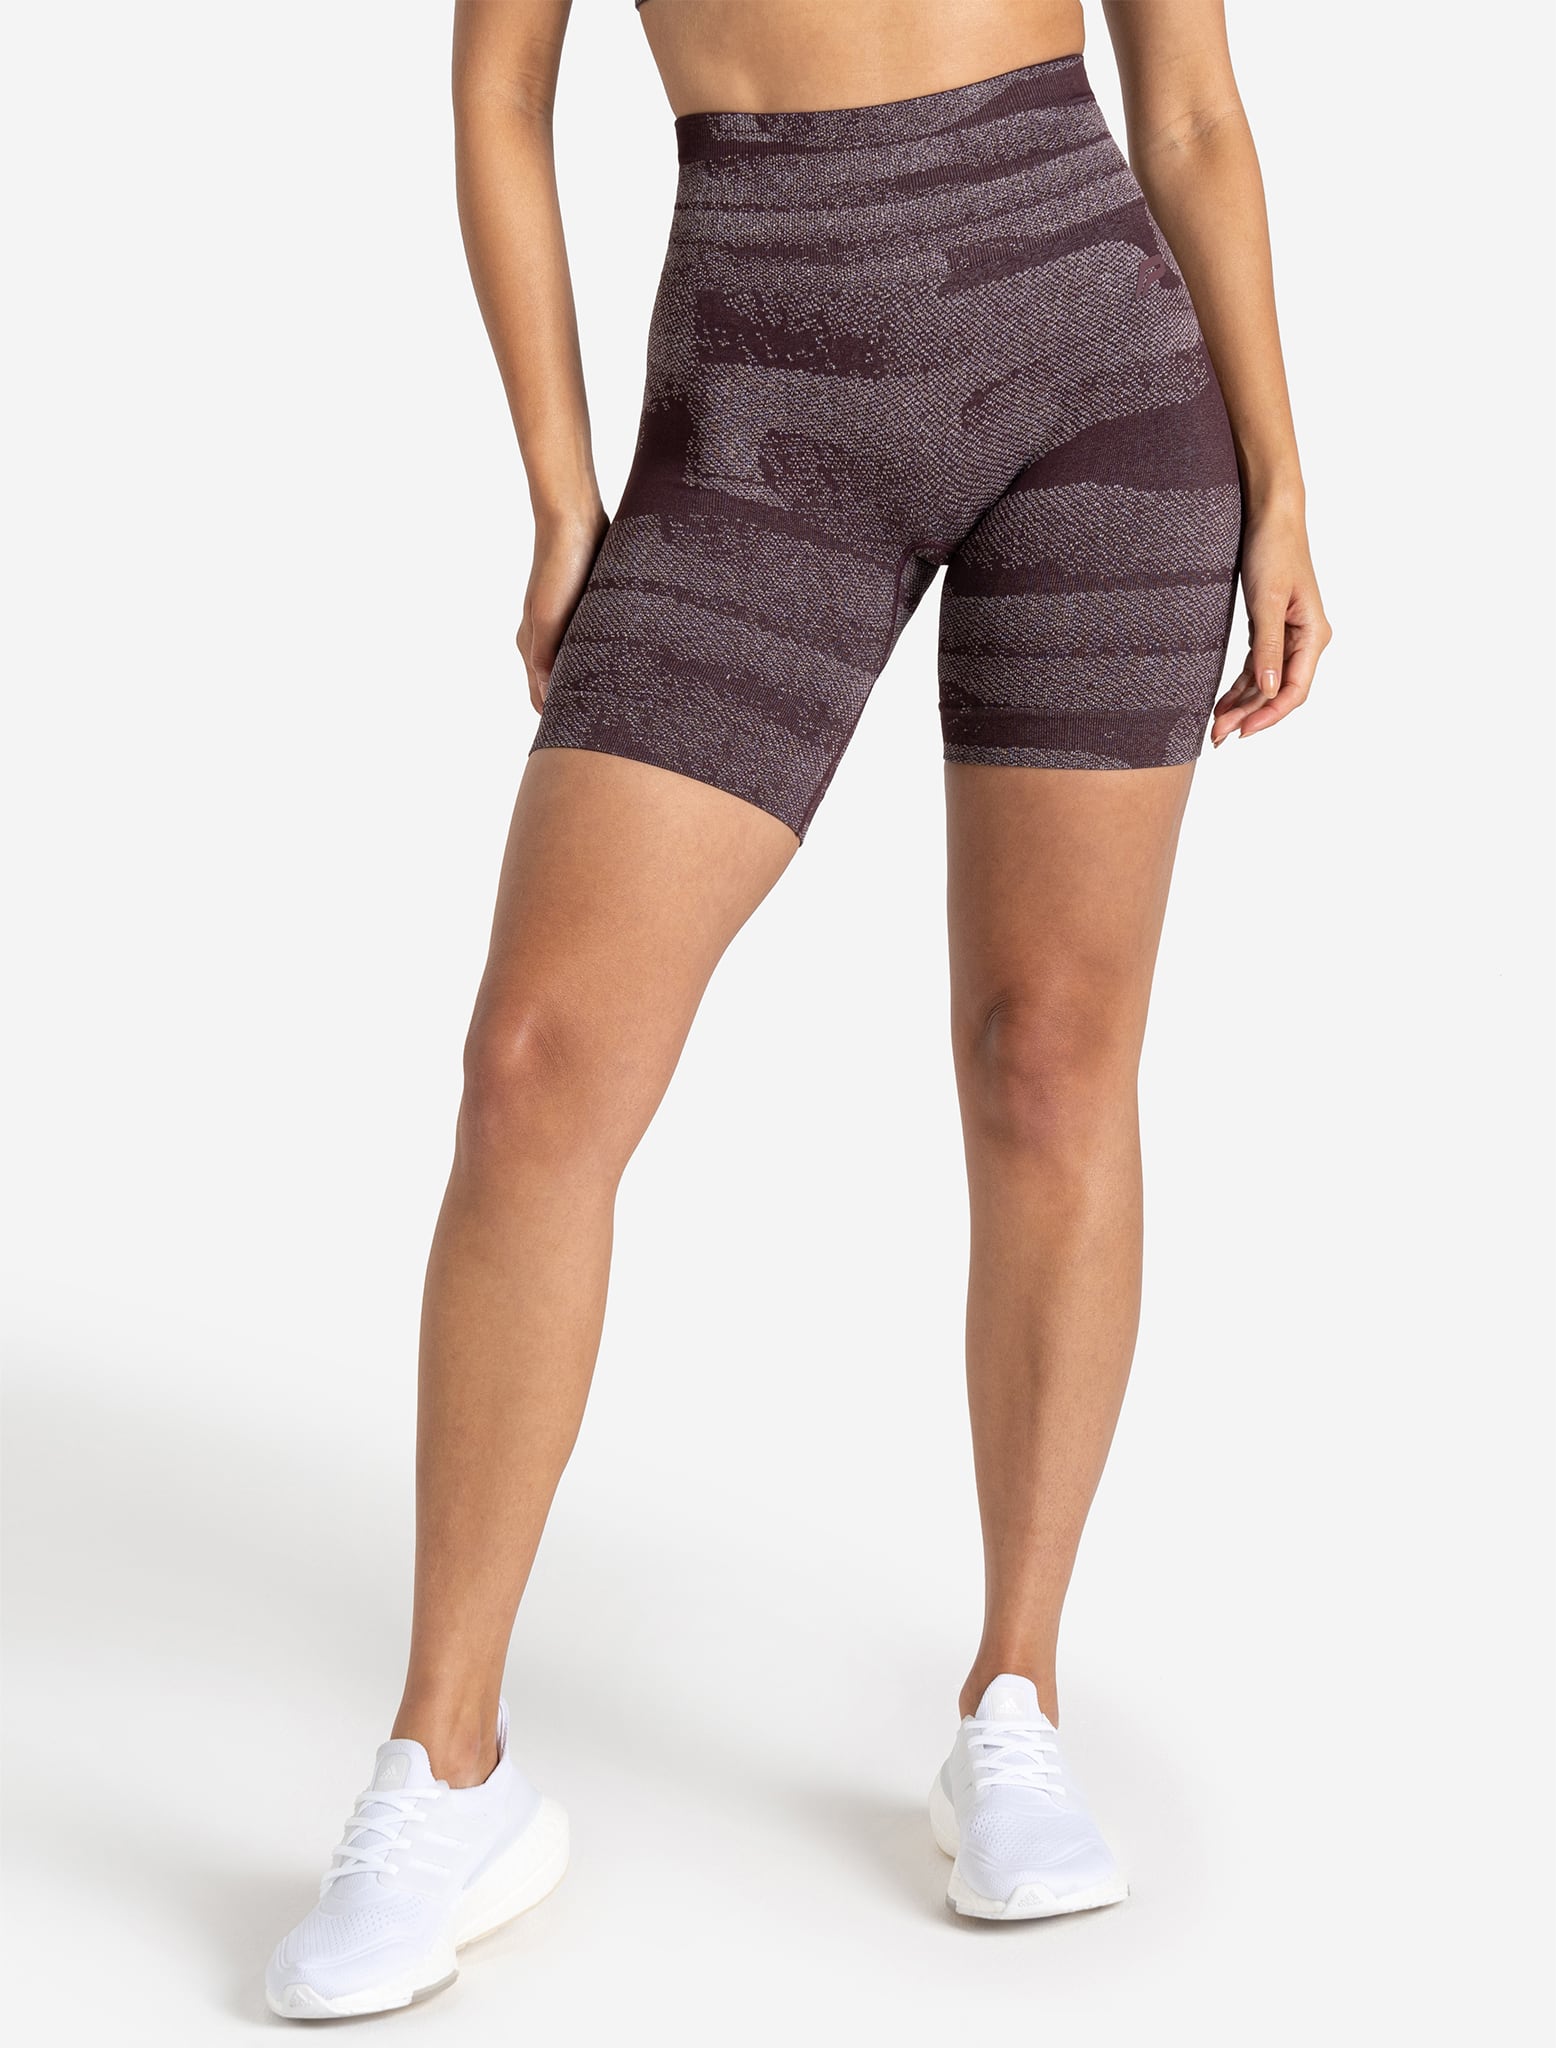 Boost Seamless Shorts - Cherry Pursue Fitness 1